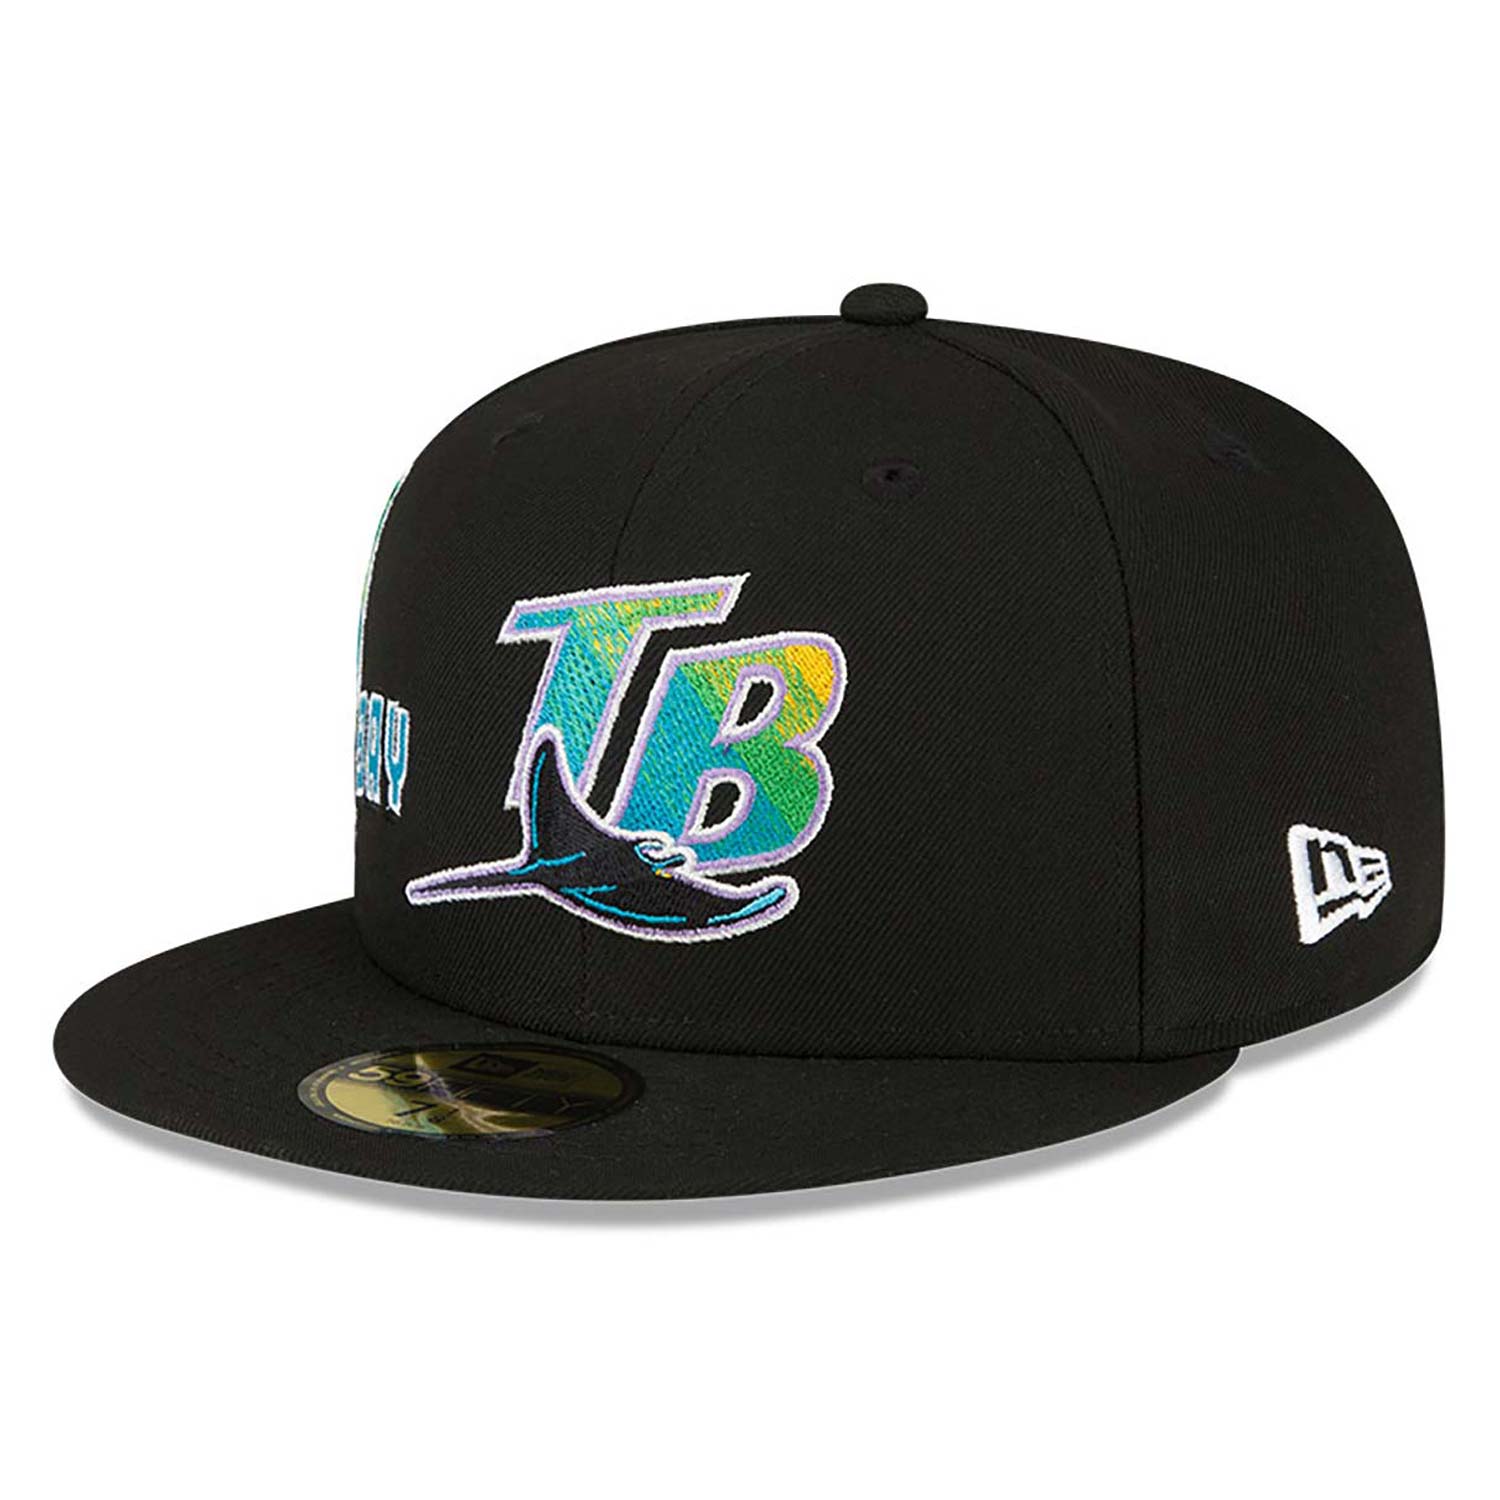 Tampa Bay Rays Stateview Black 59FIFTY Fitted Cap